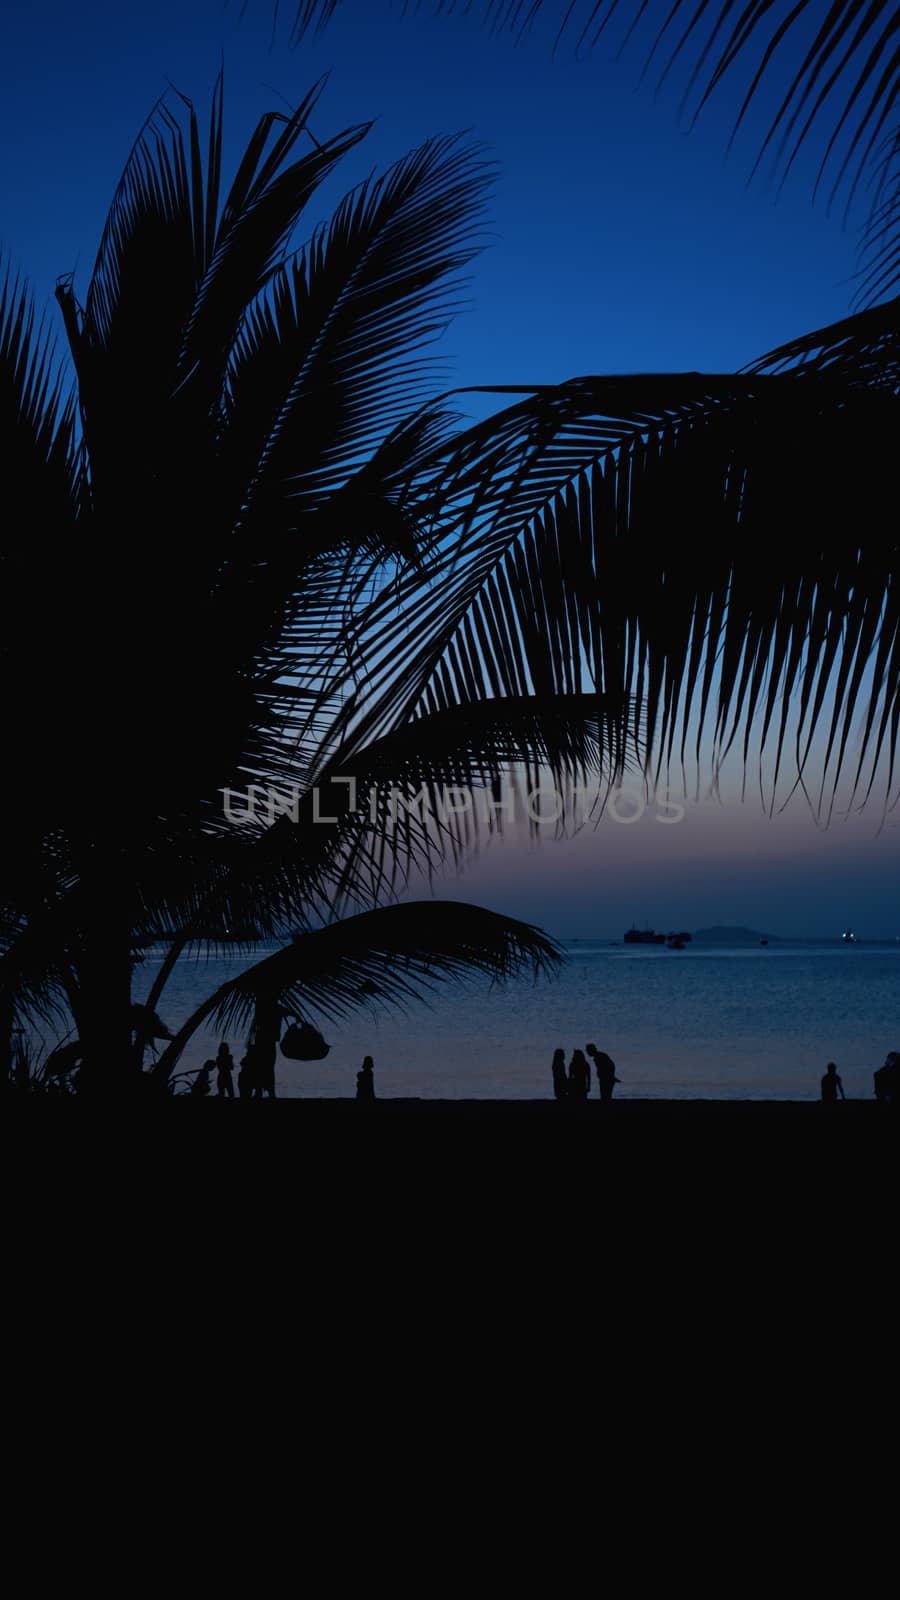 Silhouette of people on tropical beach at sunset - Tourists enjoying time by natali_brill